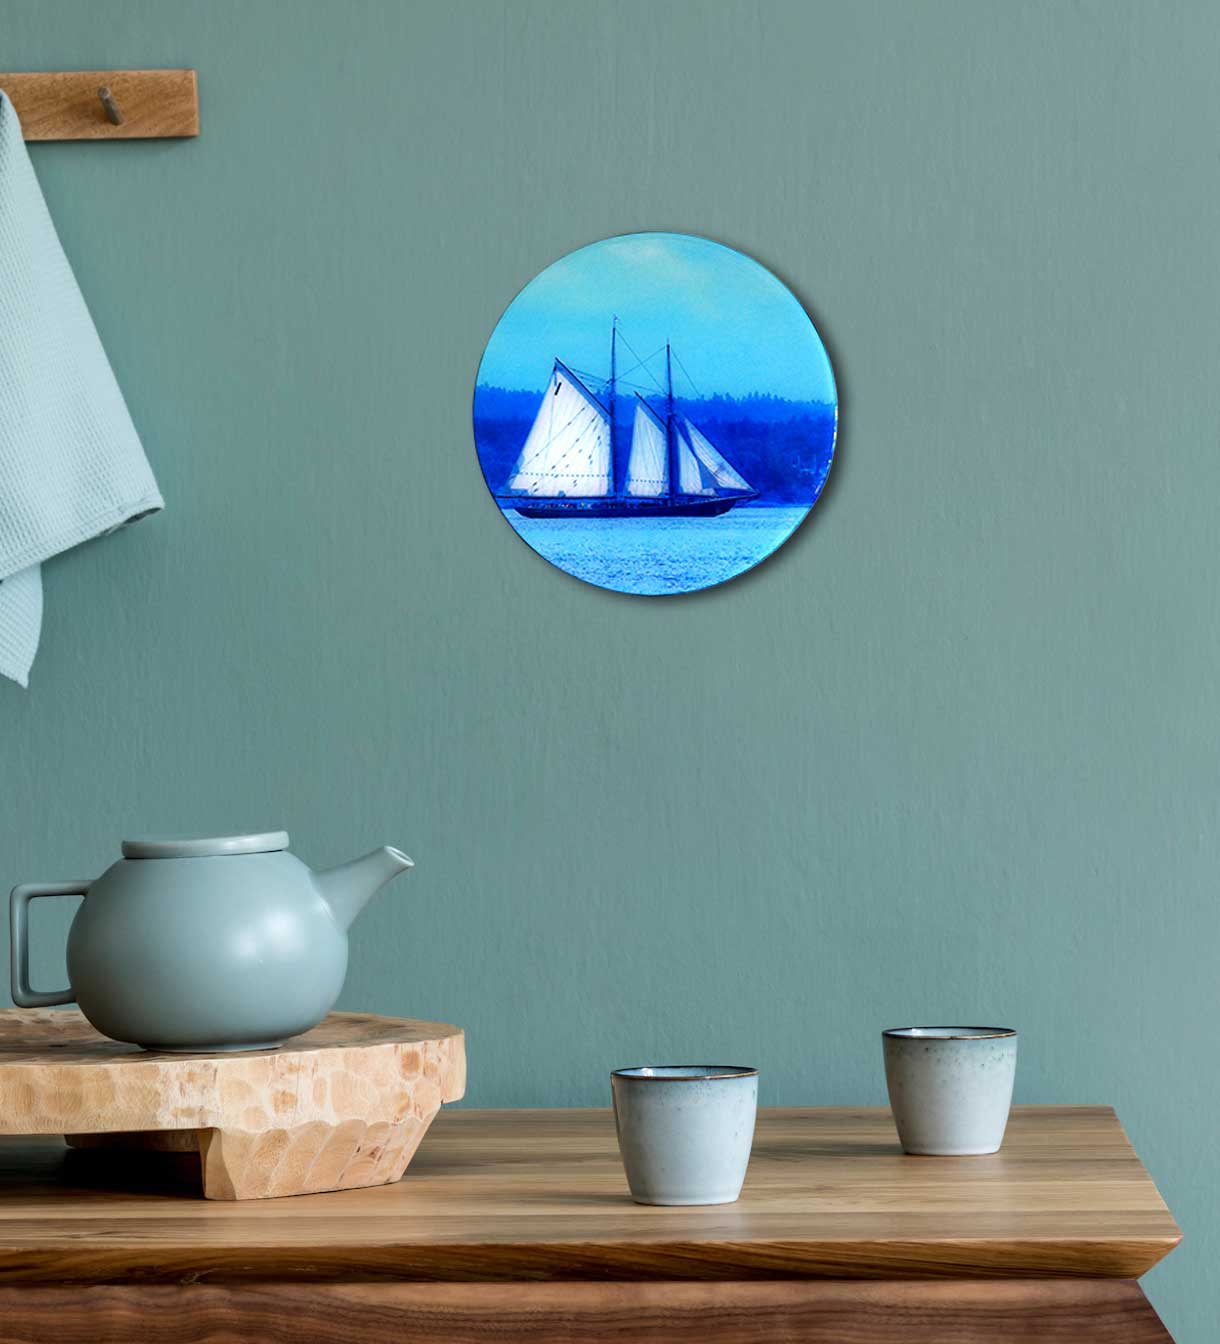 Bluenose II, the internationally renowned schooner, designed and constructed in Lunenburg, Nova Scotia, gliding along the tranquil waves of Blue Rocks Harbour. It is a perfect piece of art to add to any room. This beautiful round wood panel features unique Bluenose photography coated with resin, measuring 8 inches in diameter. Ready to hang on the wall, this piece will add a touch of originality to your home.